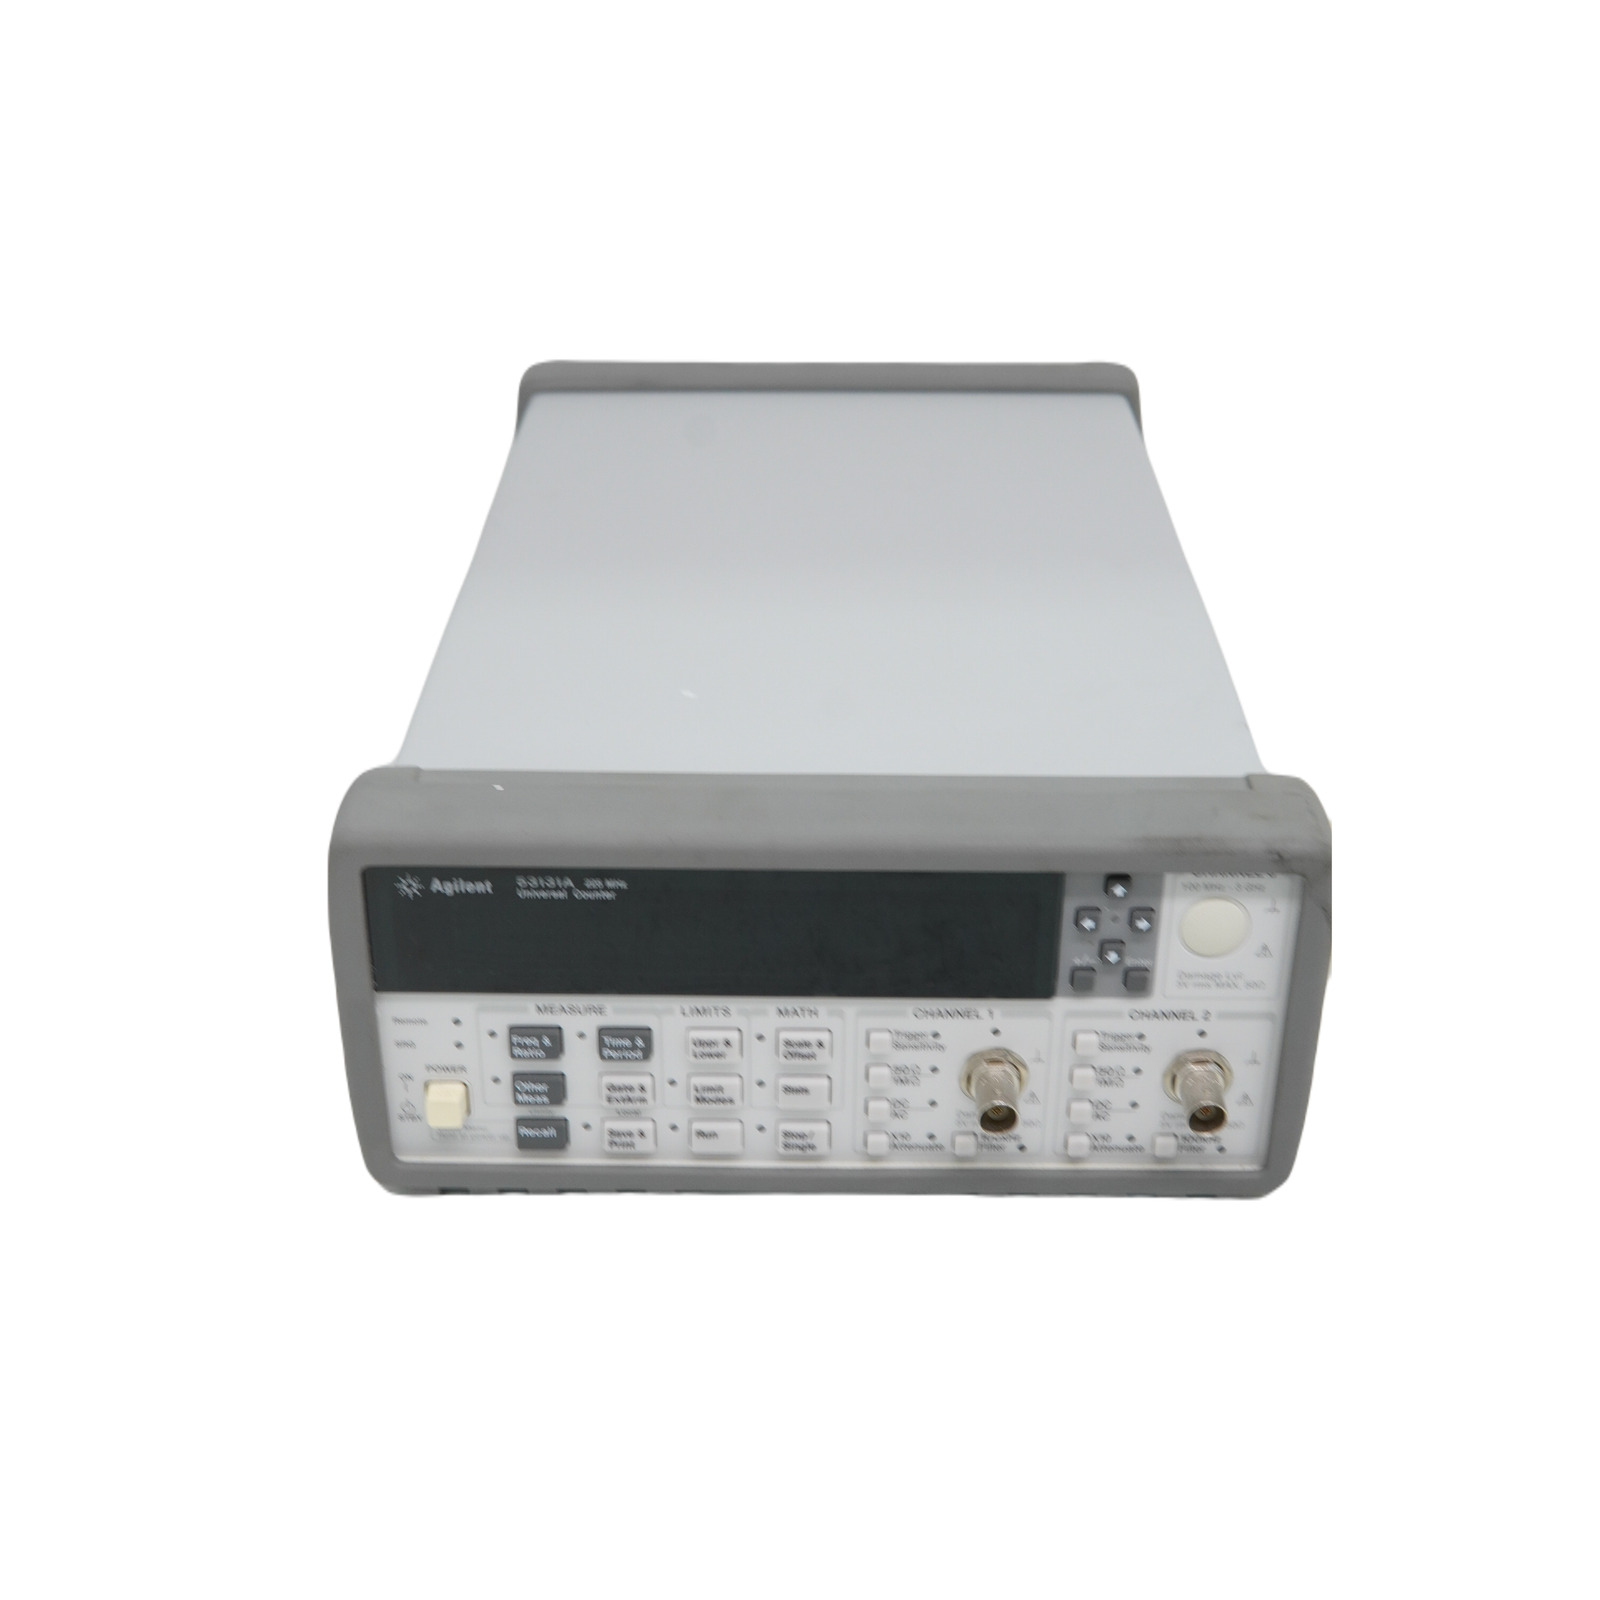 Agilent 53131A 225MHz Universal Frequency Counter/Timer